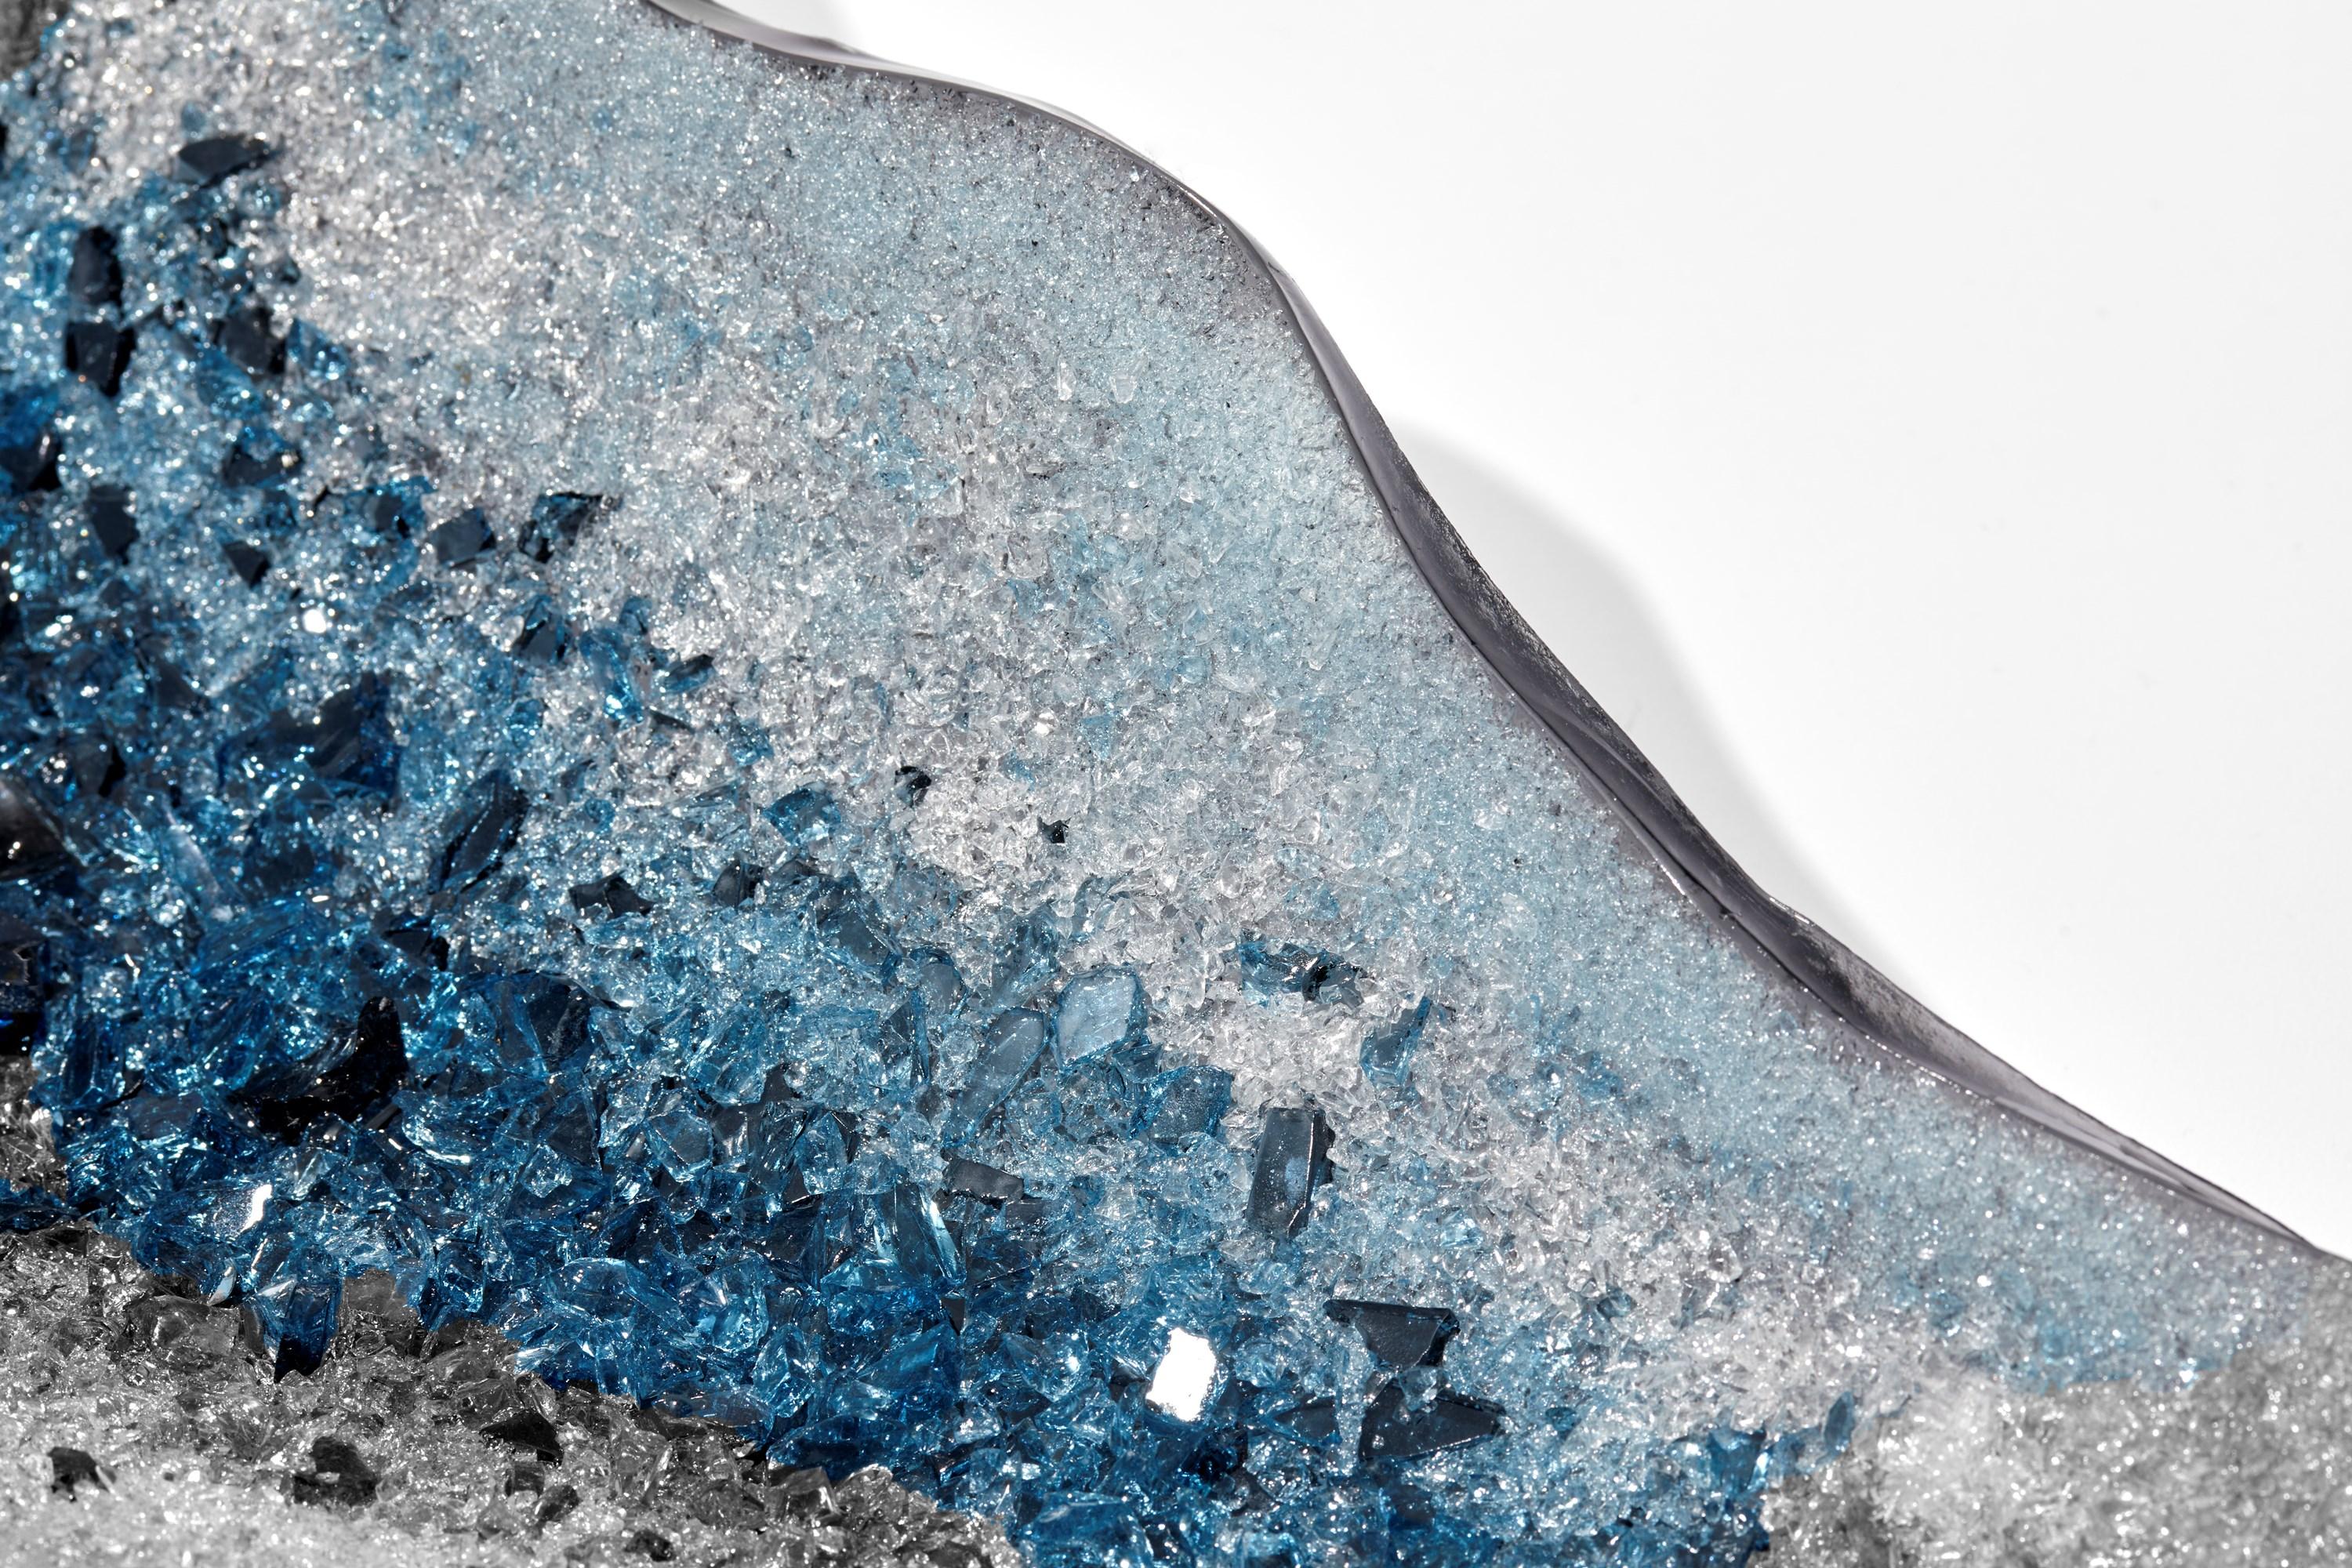 Celestine viii, a Blue & Turquoise Geode Theme Glass Sculpture by Wayne Charmer In New Condition For Sale In London, GB